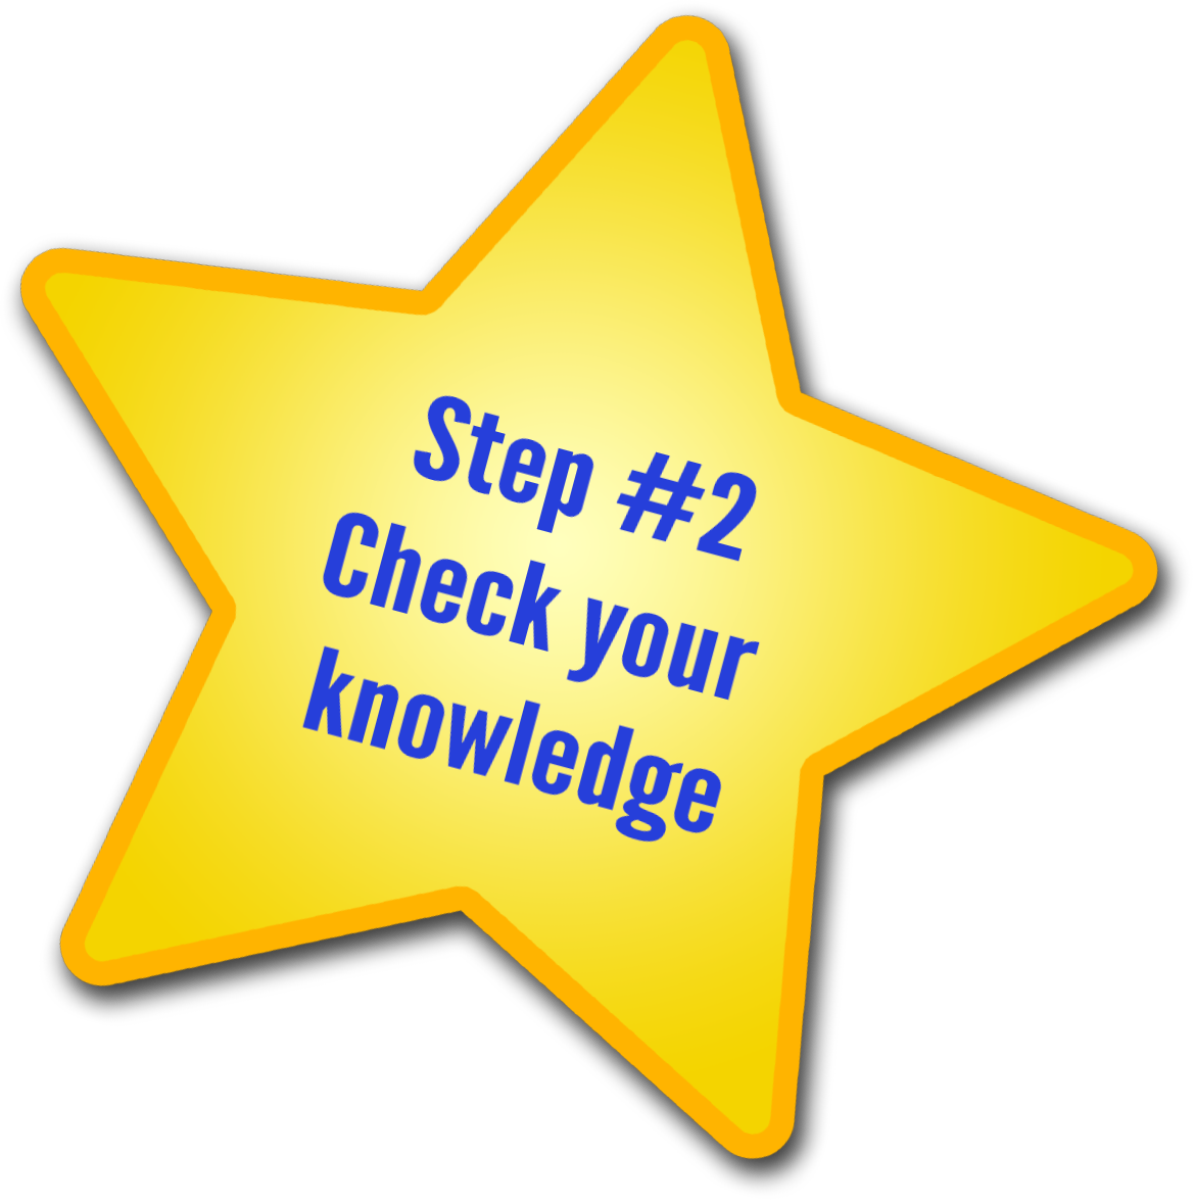 Step 2 - Check your knowledge